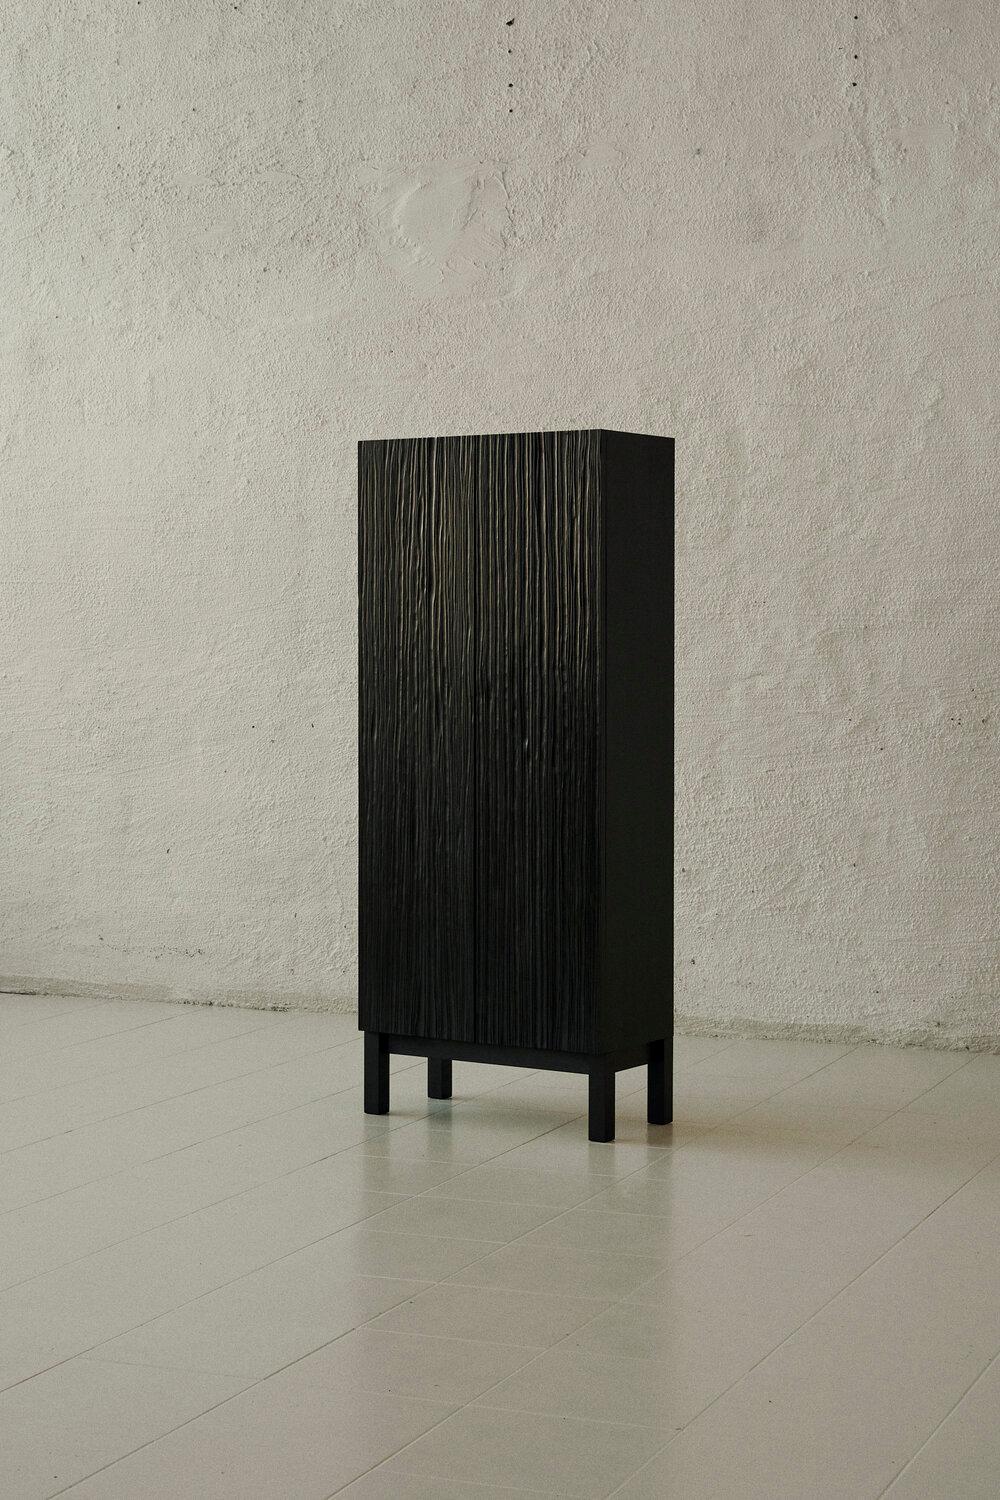 Armarium cabinet by Vilde Hagelund
Current Production
Dimensions: W 60 x D 30 x H 145 cm
Materials: Birch Wood.

Armarium is a highly functional storage unit made out of birch wood, with both shelves and a drawer for safe keeping of your